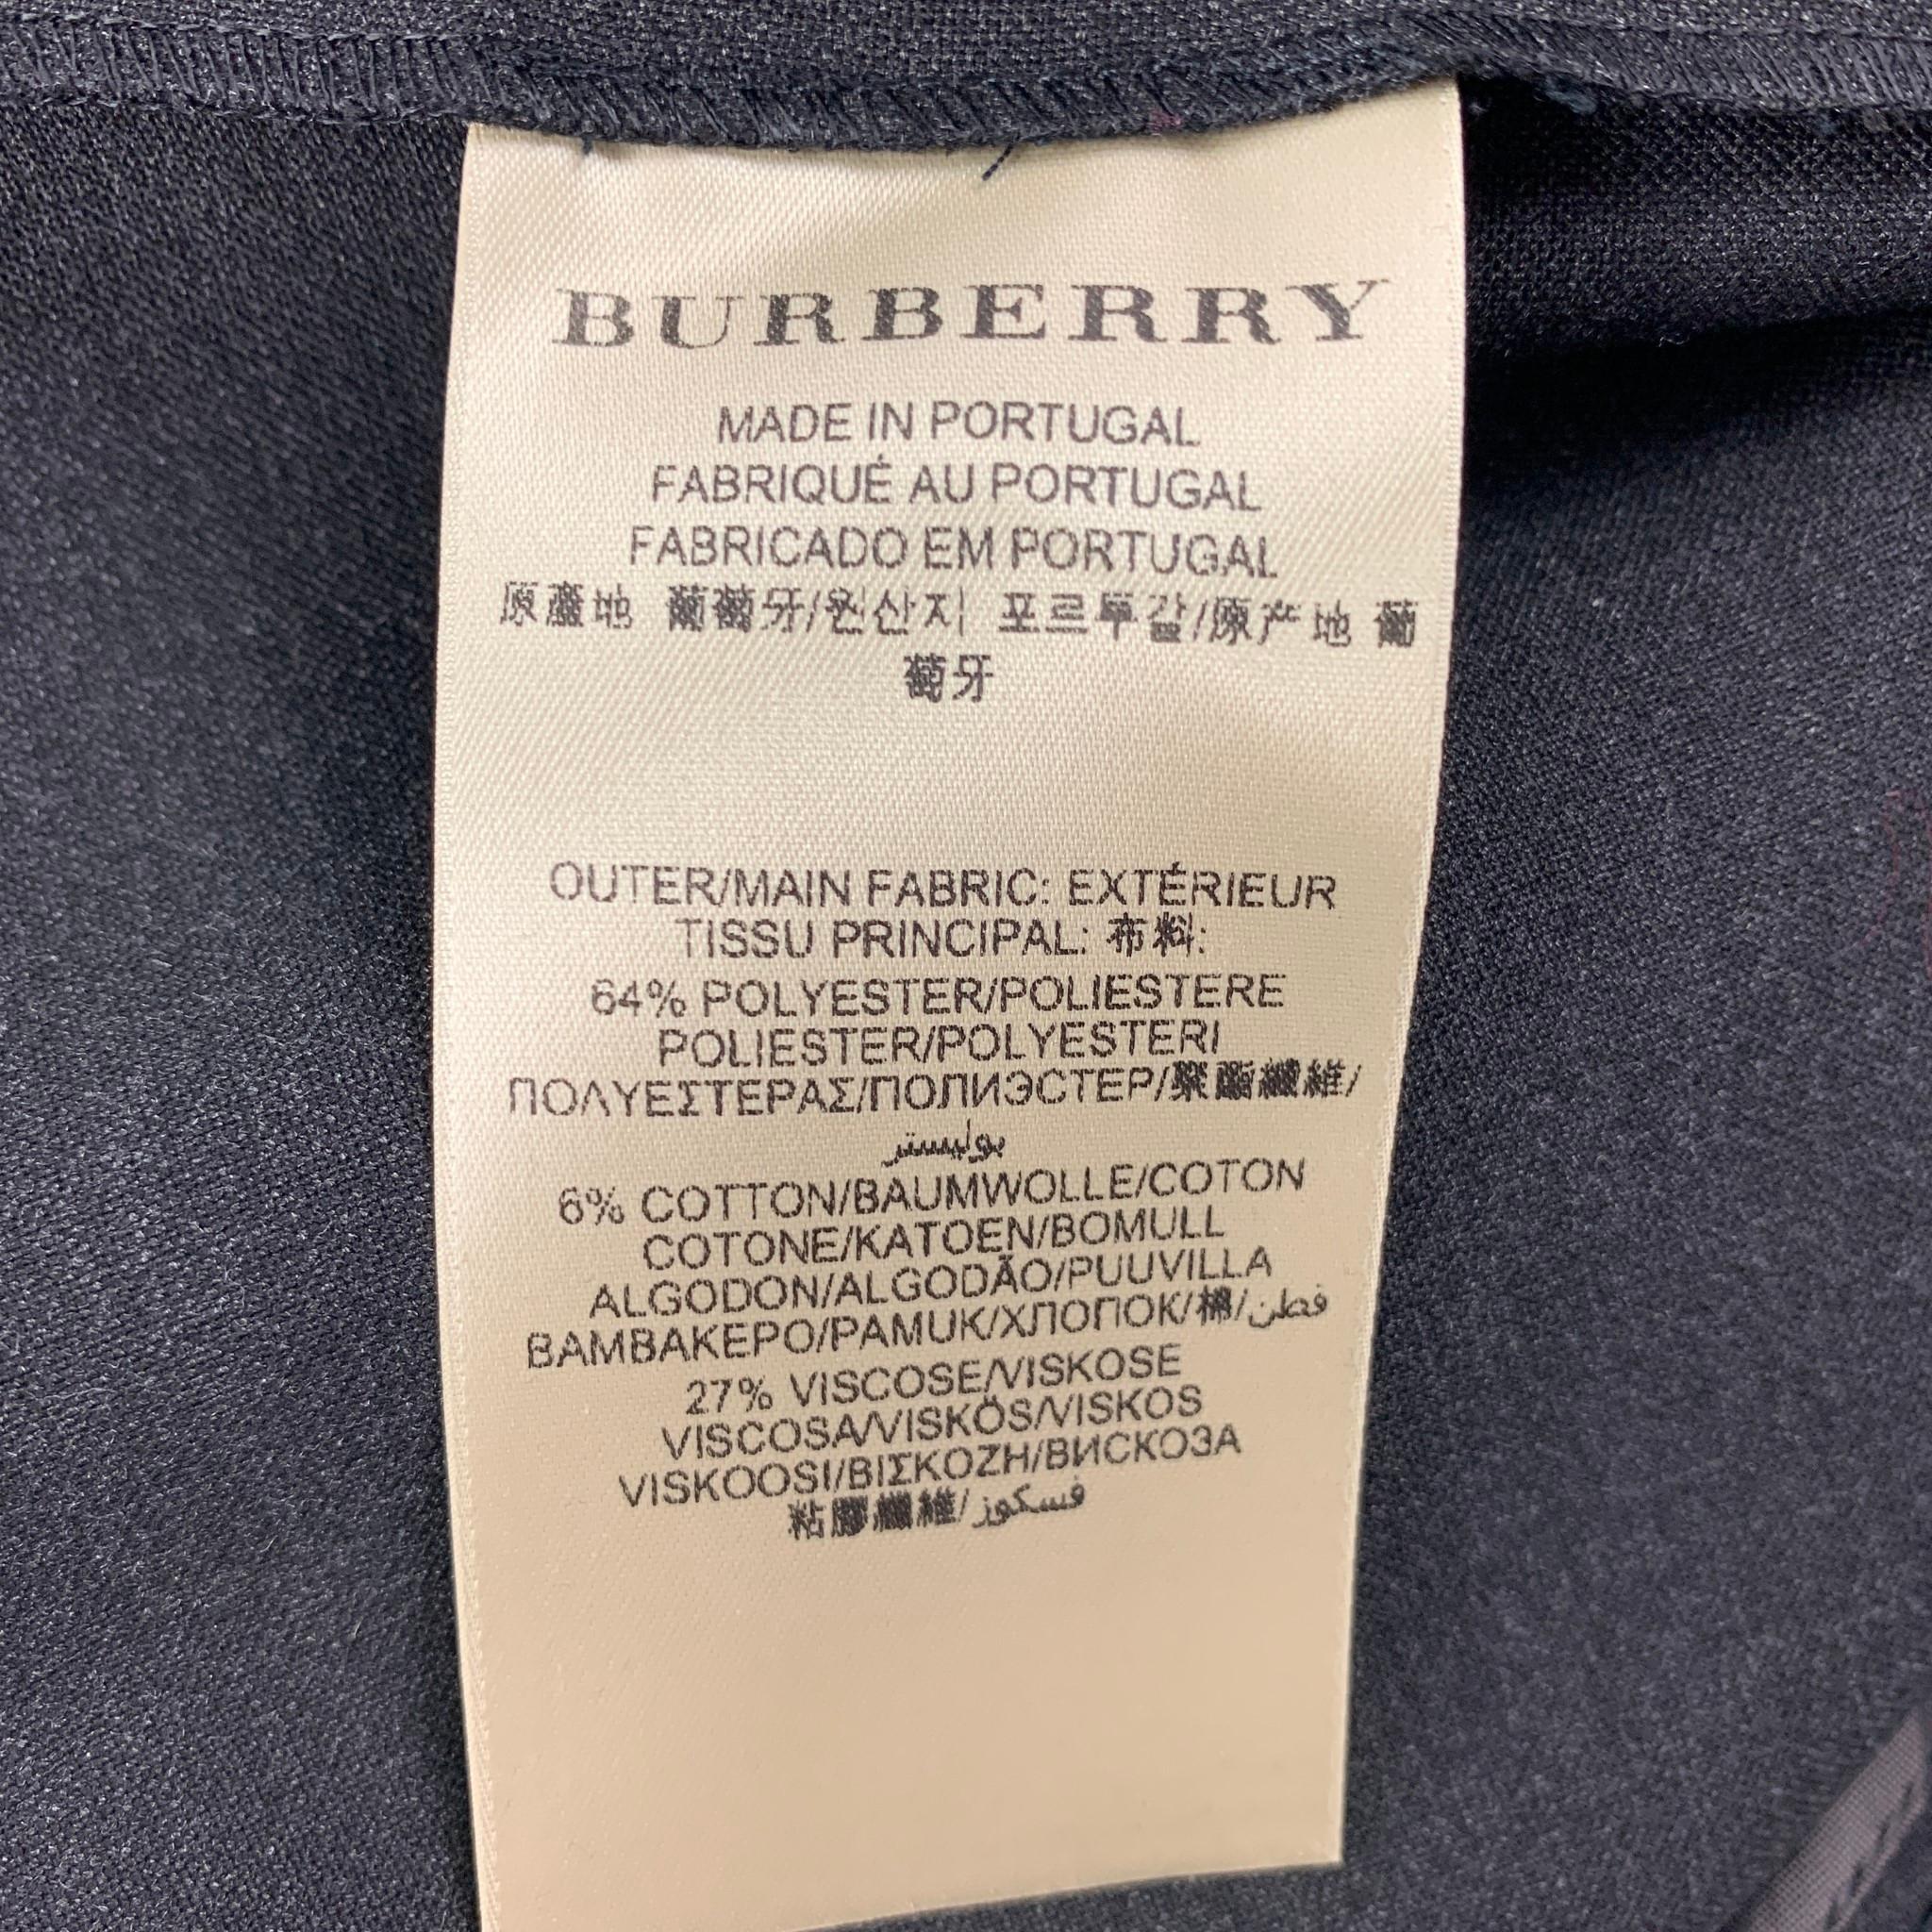 burberry made in portugal